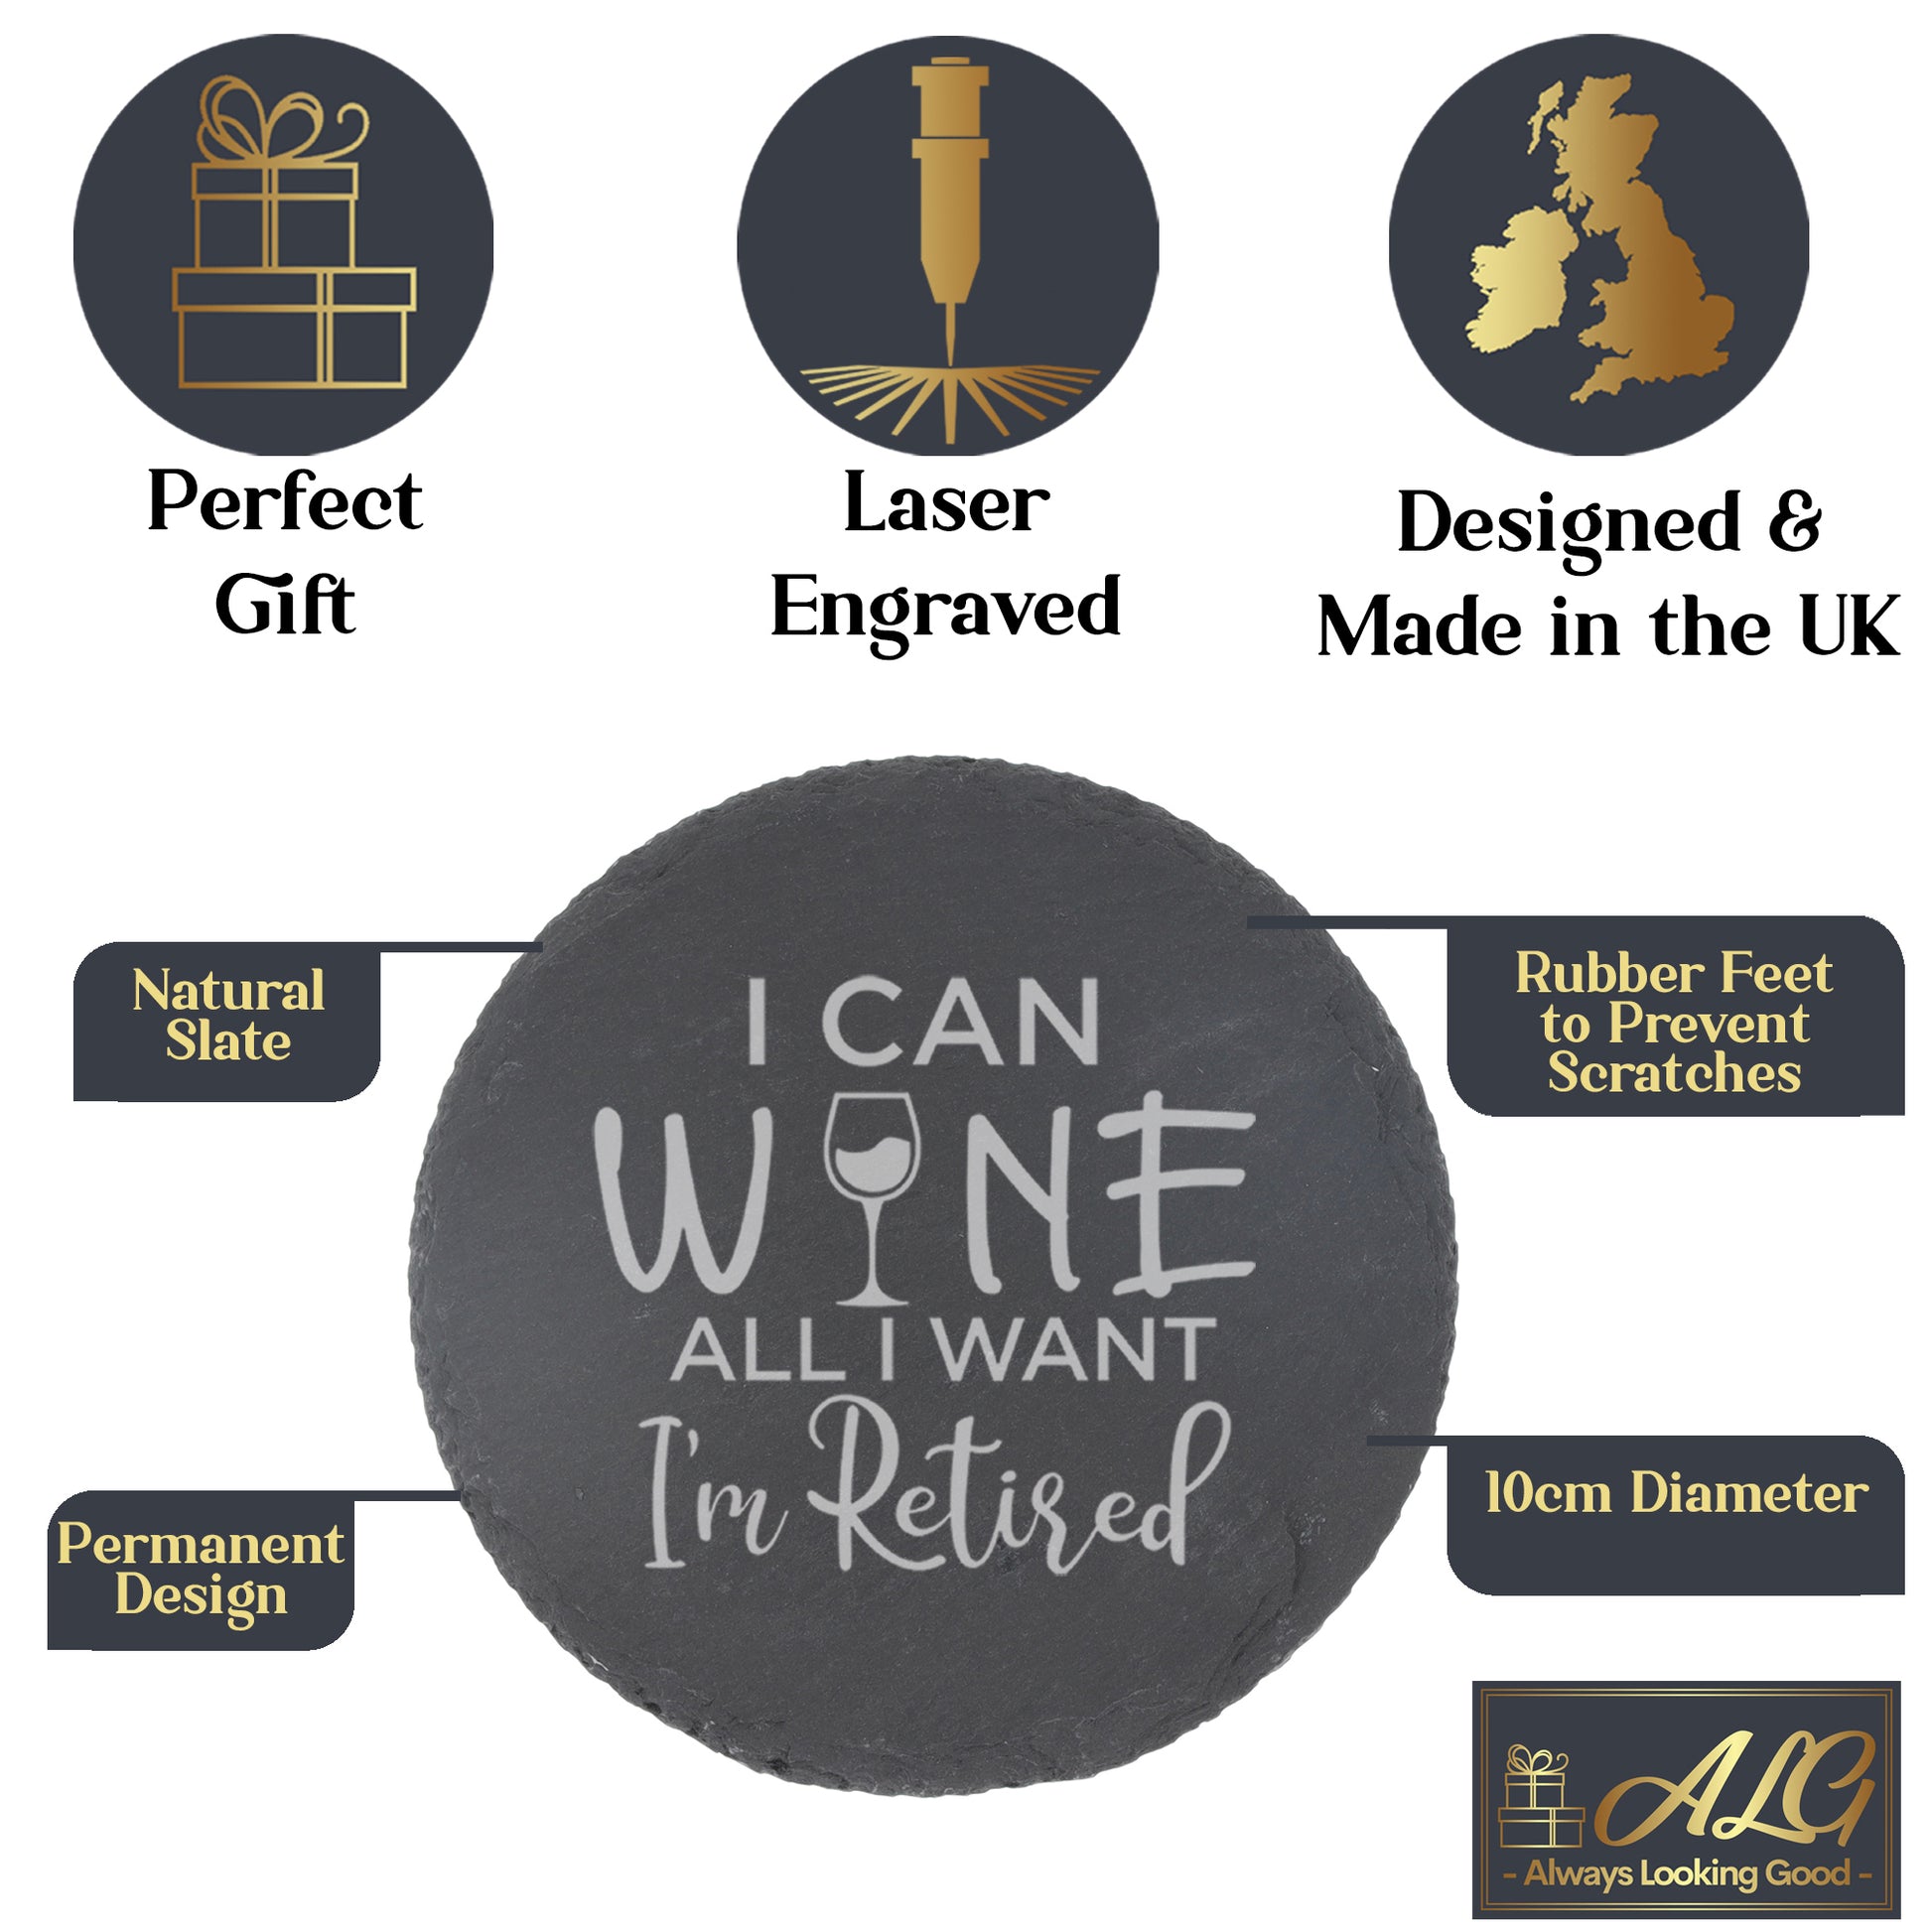 Engraved "I can wine all I want I'm retired" Funny Retirements and/or Coaster Novelty Gift  - Always Looking Good -   